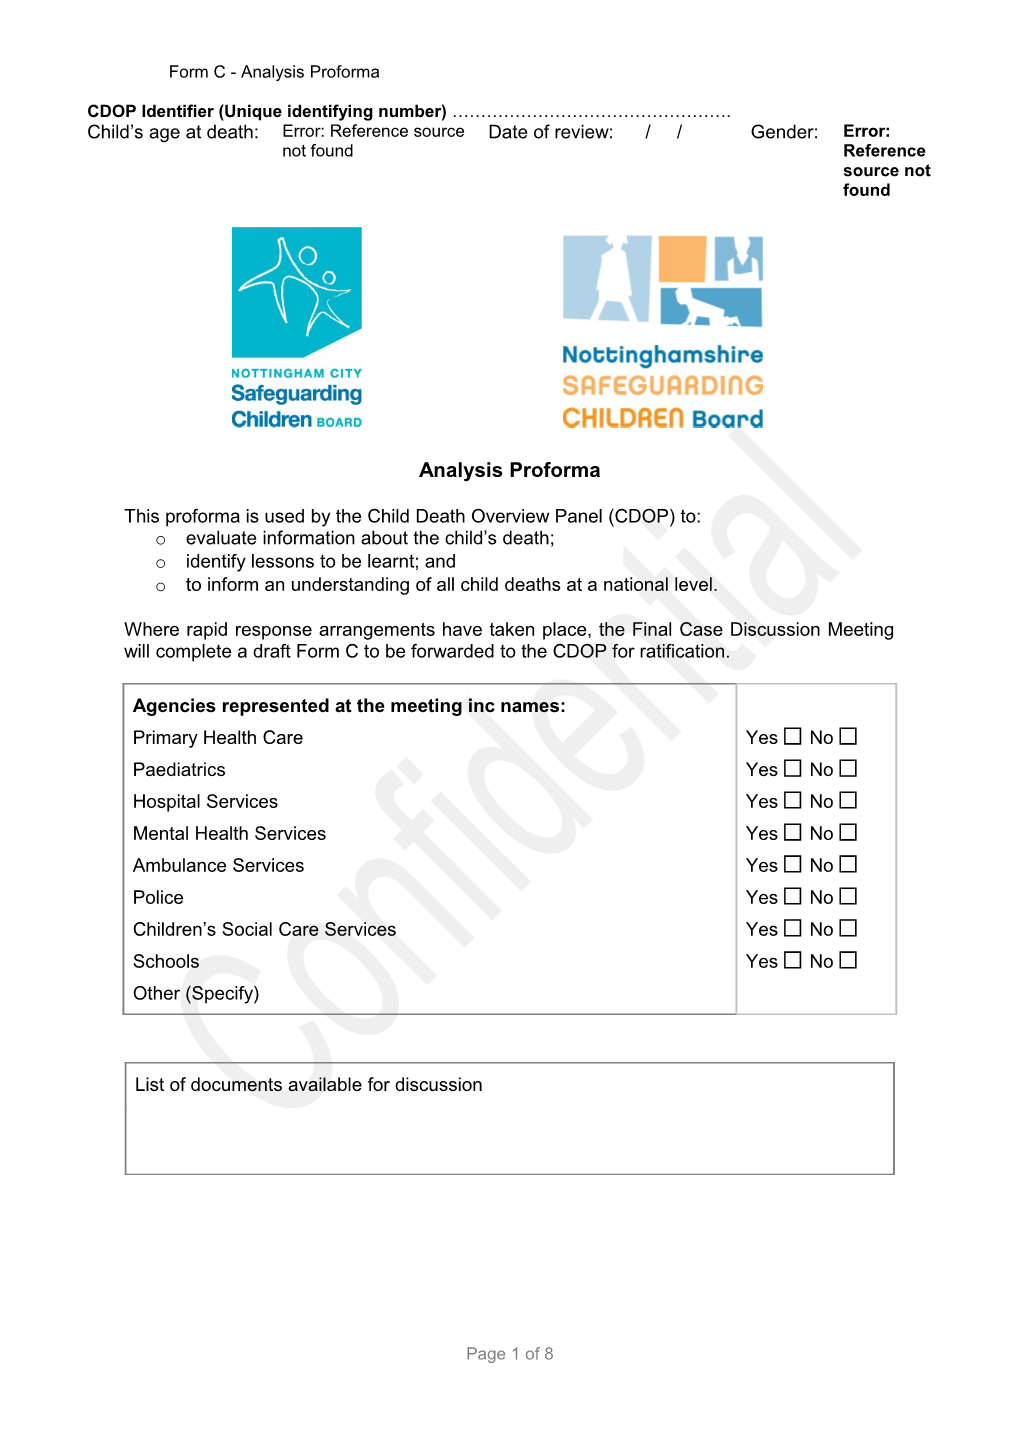 This Proforma Is Used by the Child Death Overview Panel (CDOP) To